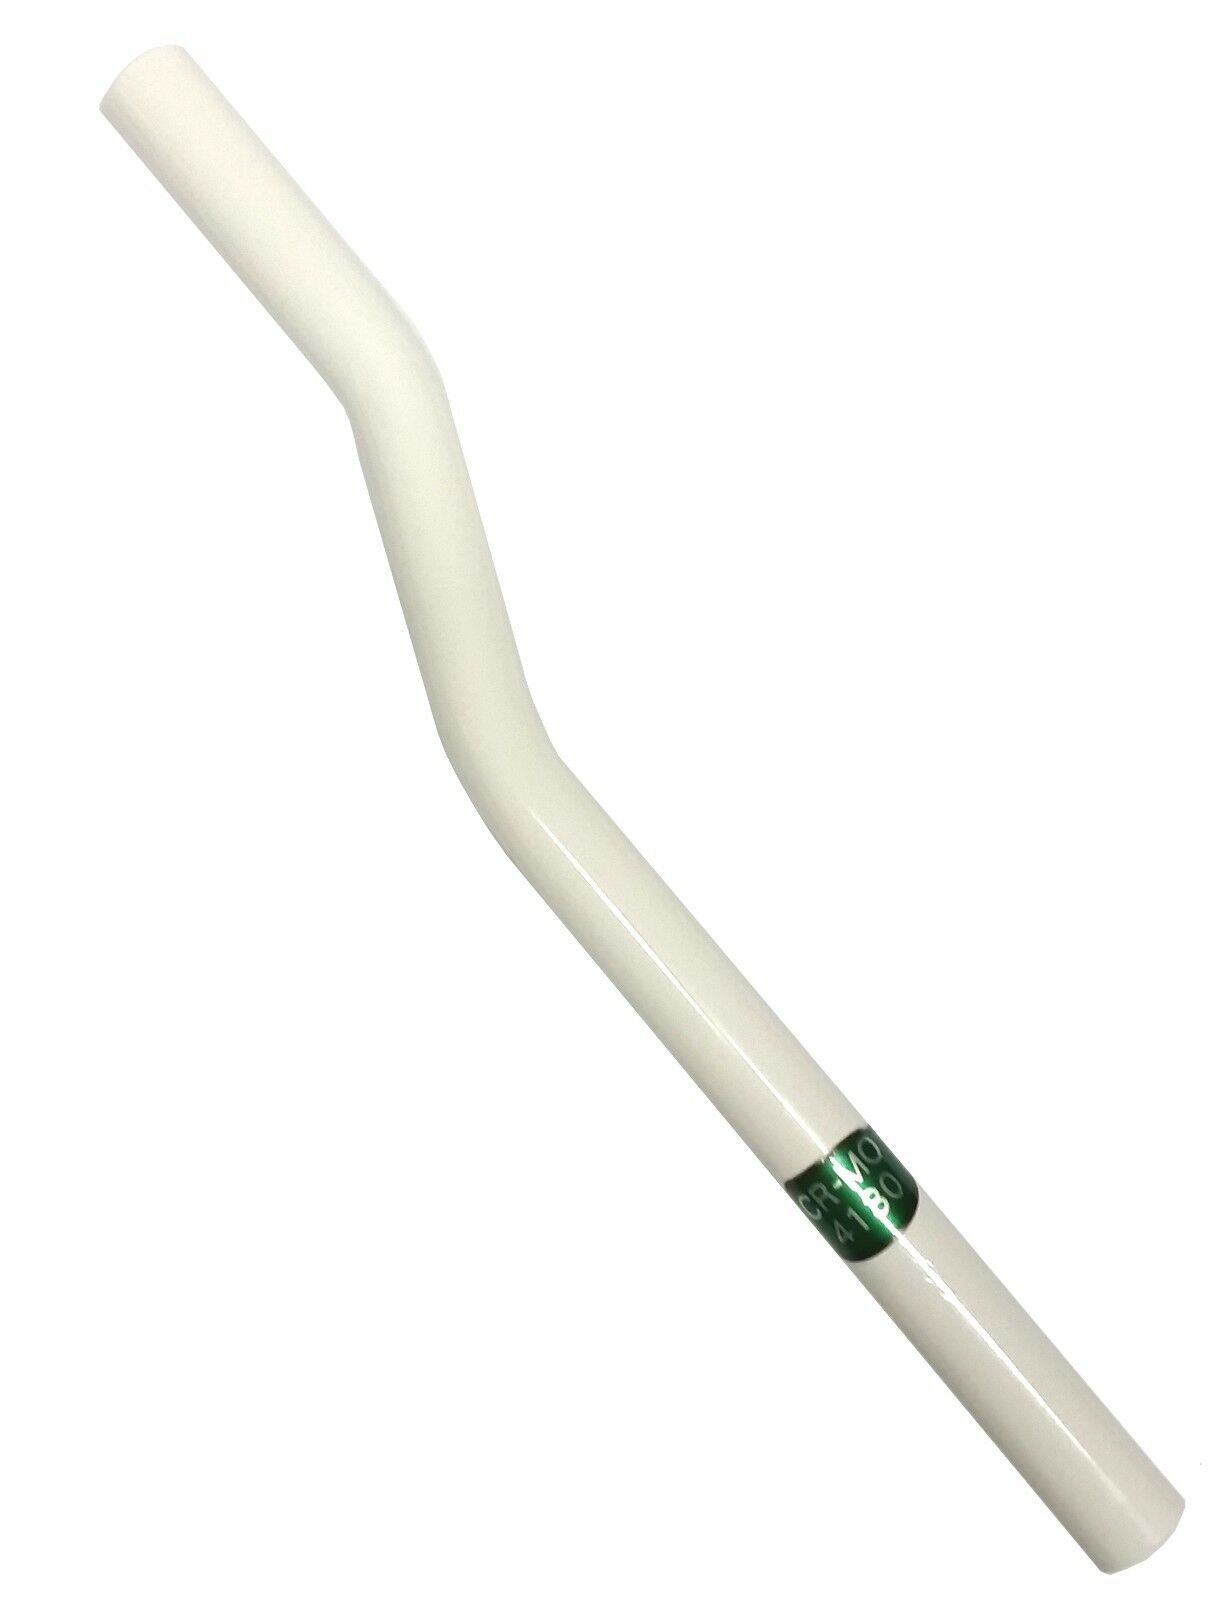 22.2mm (7/8") Chromoly Snake Drainpipe-style Laid Back Seatpost - White